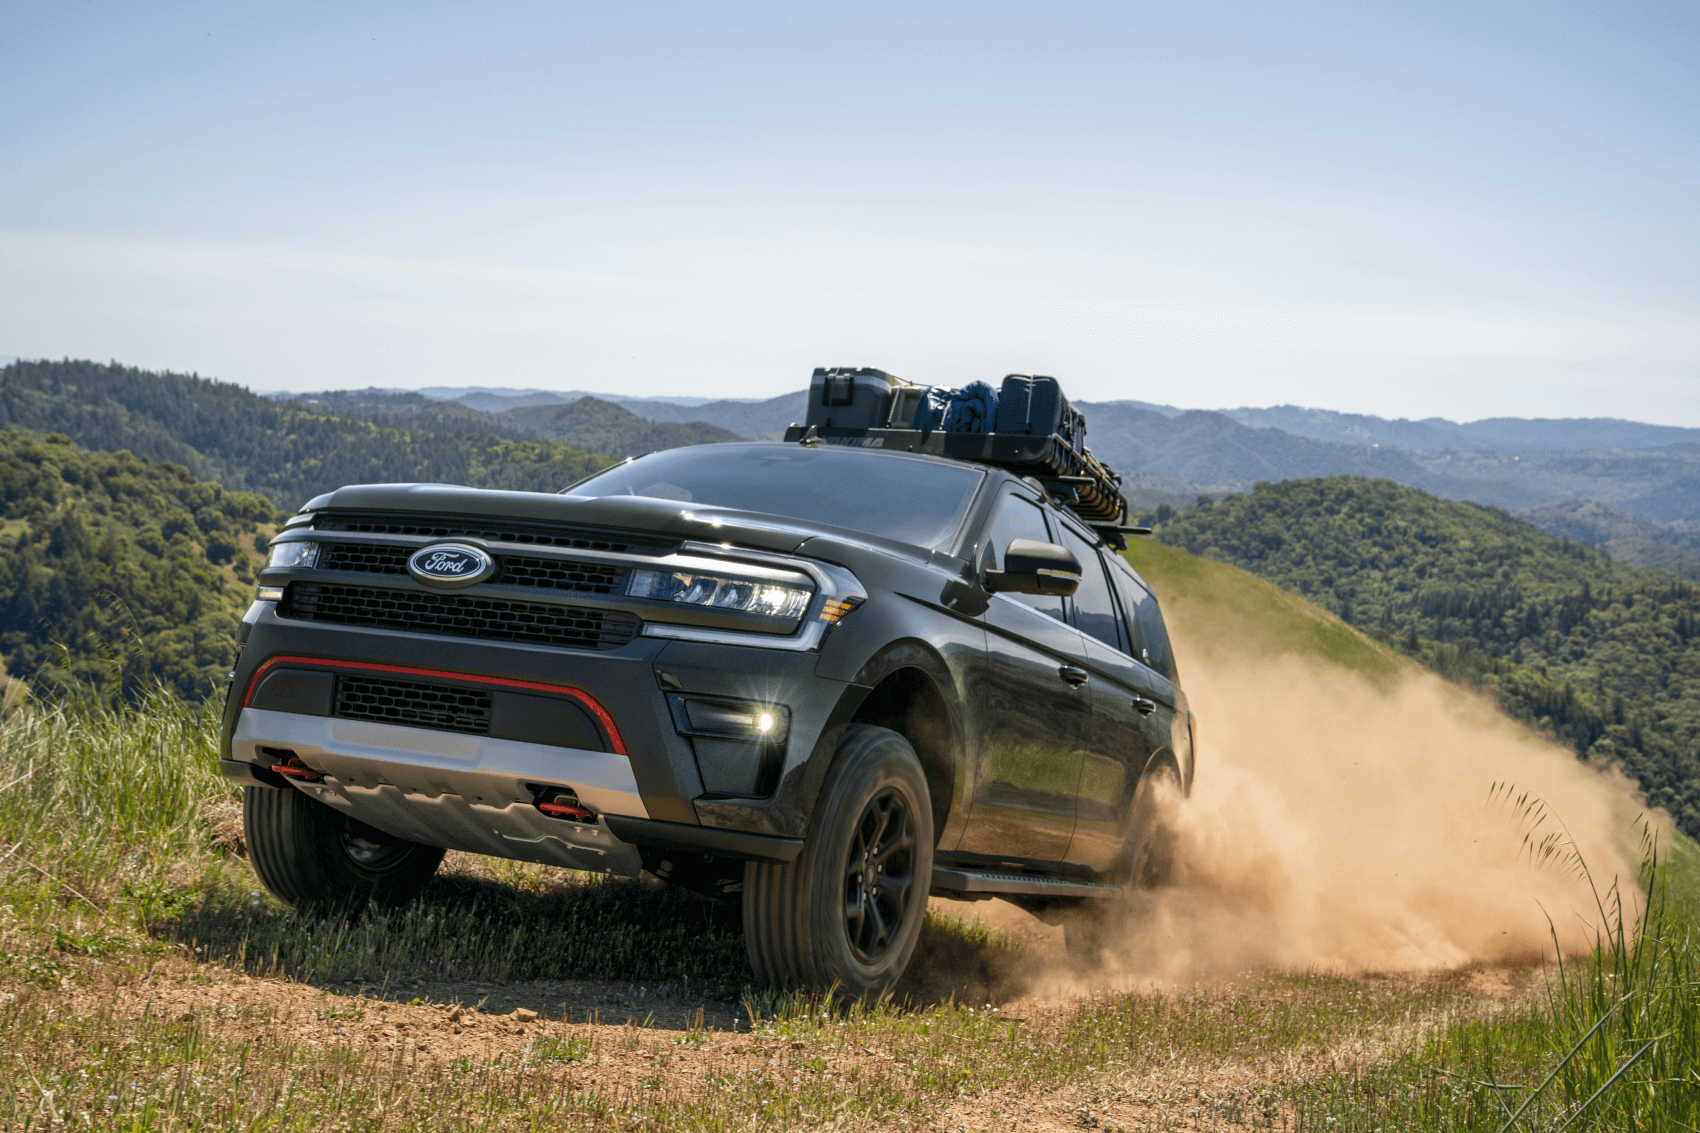 2022 Ford Expedition Review